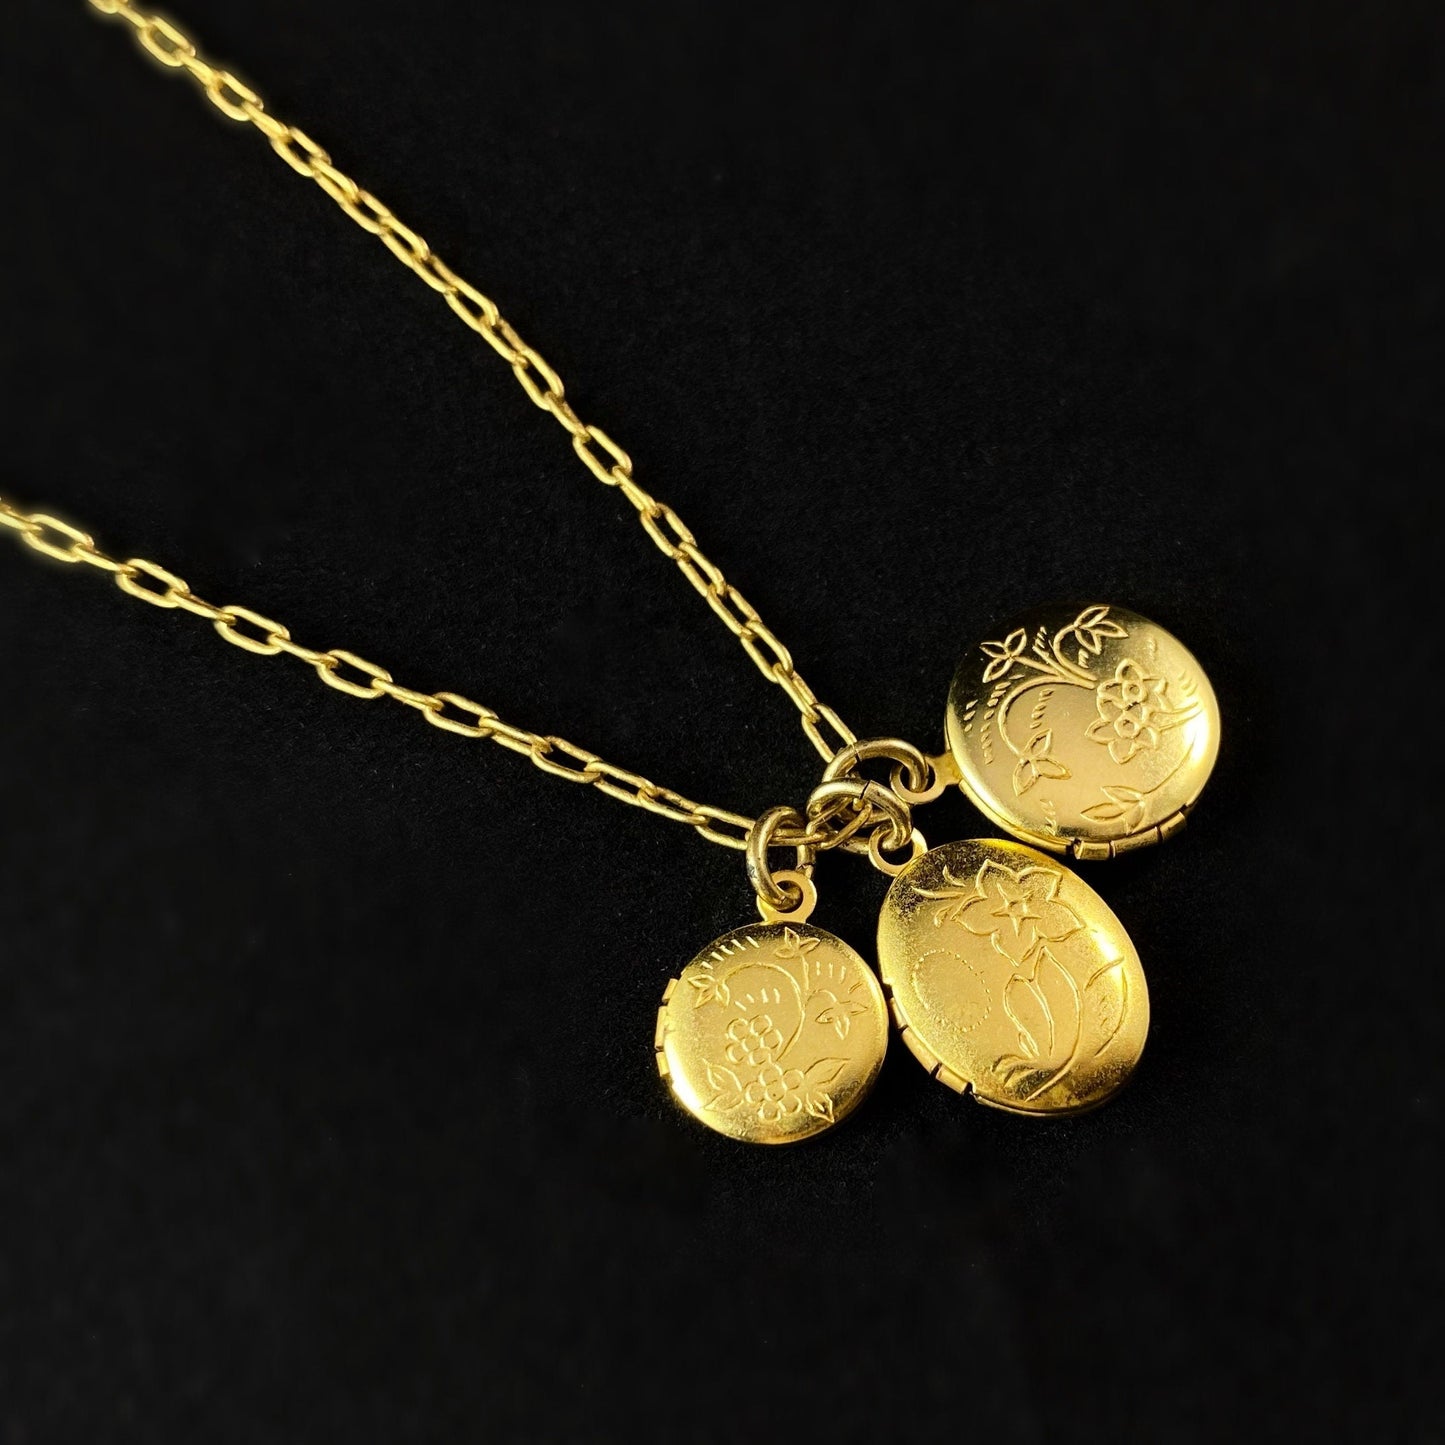 Small Gold Locket Necklace - La Vie Parisienne by Catherine Popesco